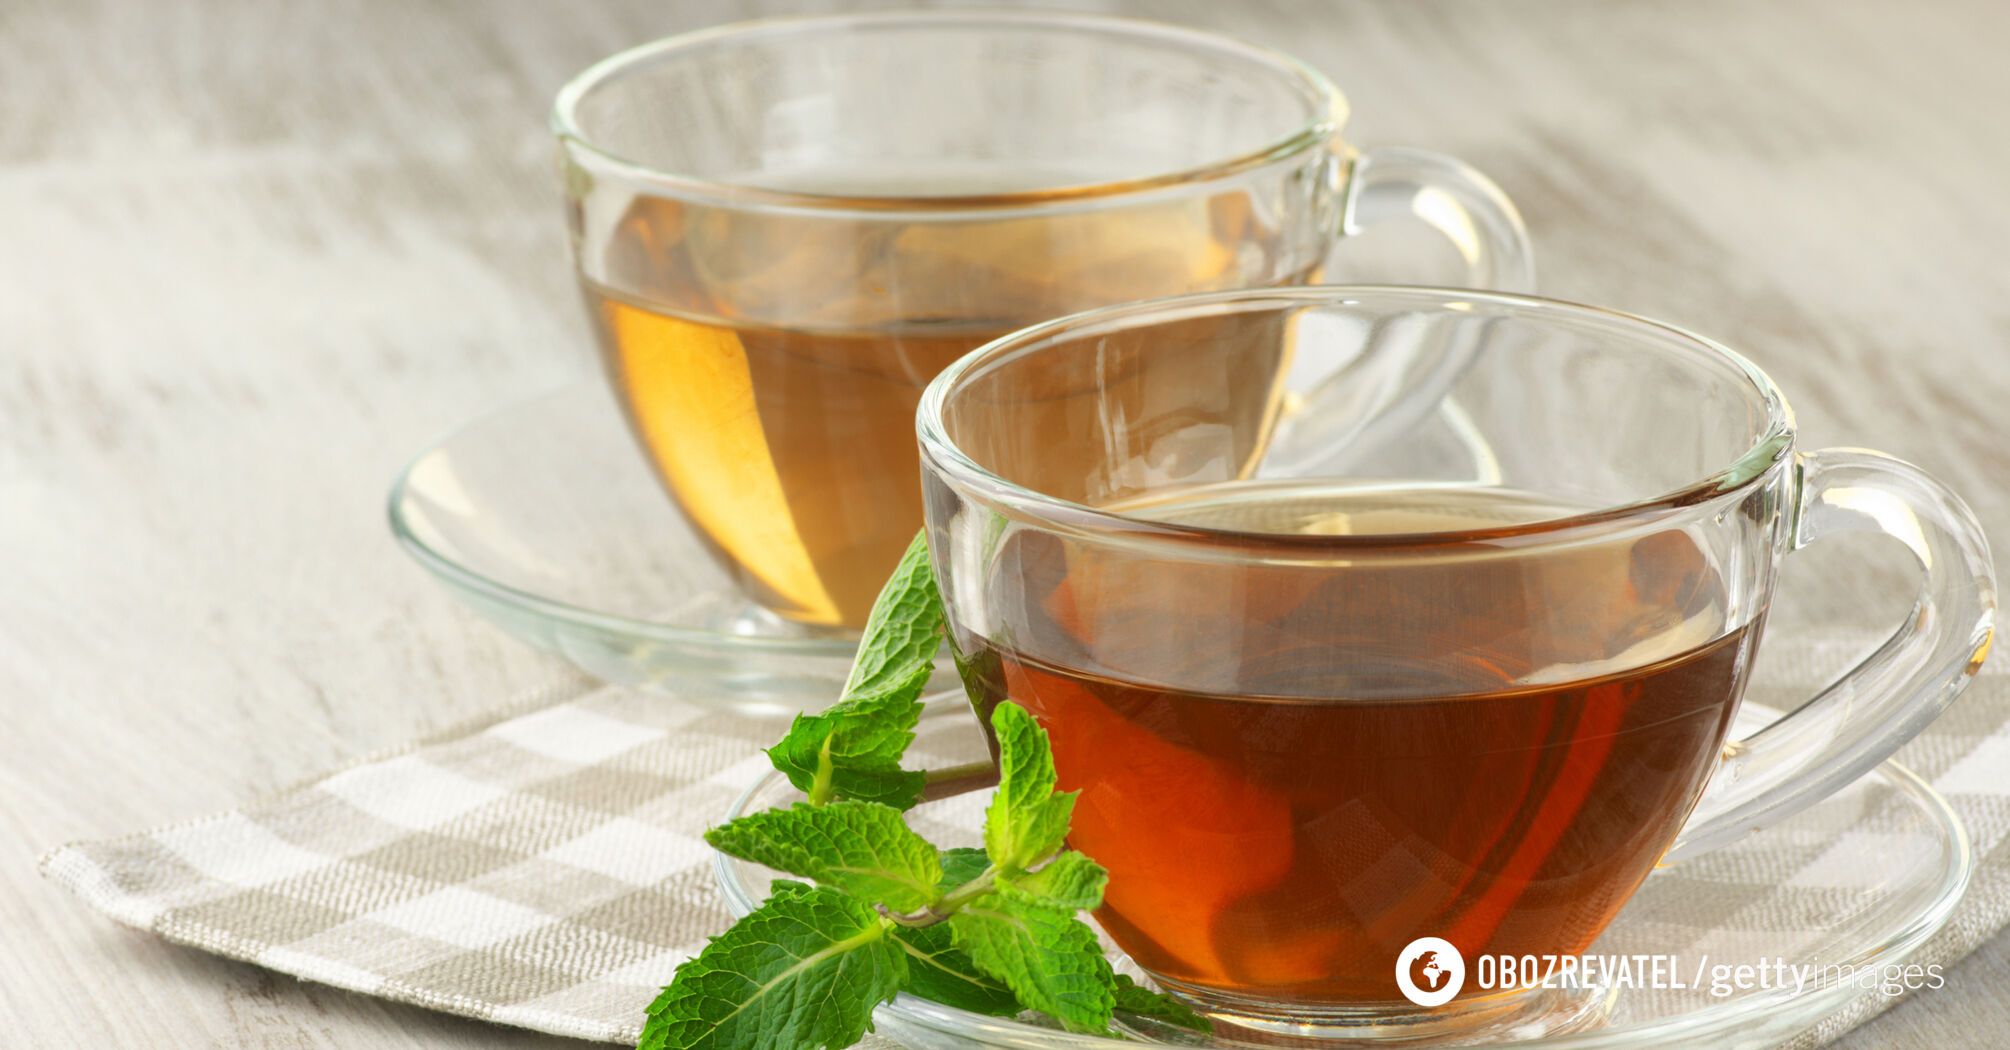 Tea strengthens blood vessels and reduces heart stress